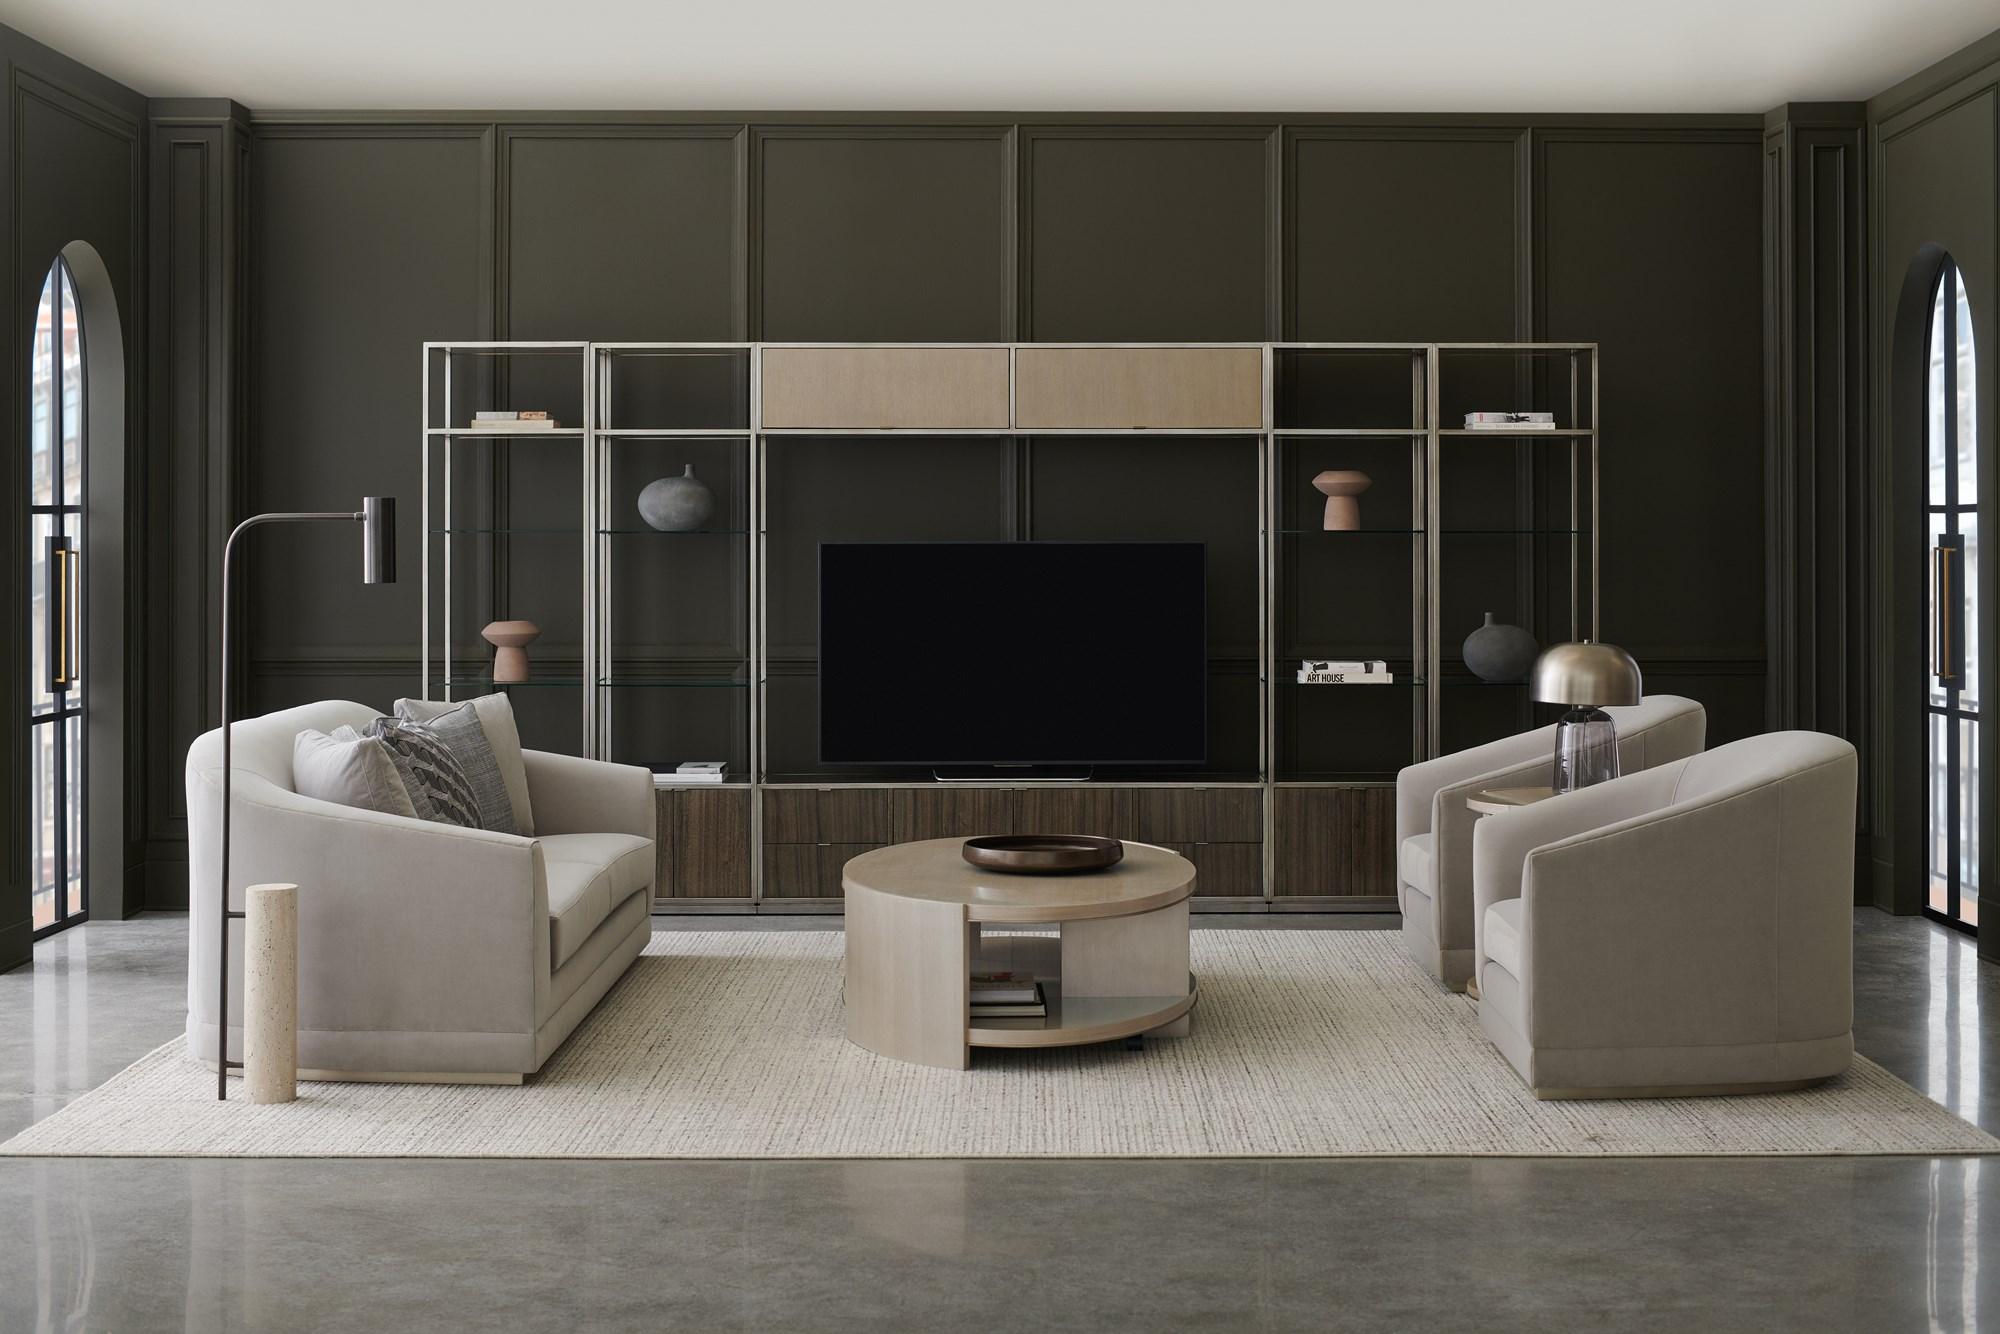 

    
Sepia & Smoked Stainless Entertainment Center 4Pcs LA MODA DISPLAY by Caracole
